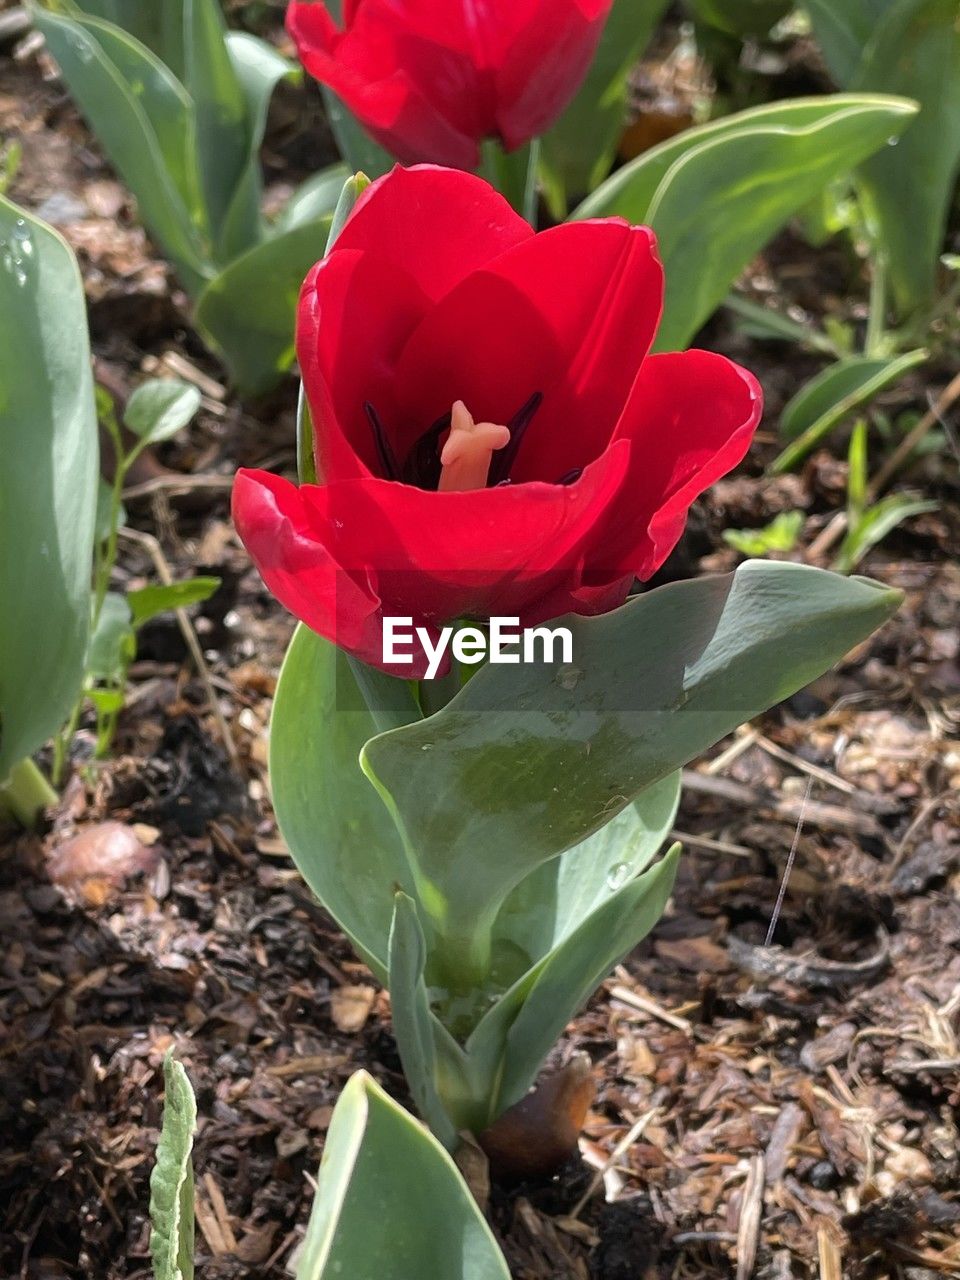 plant, flower, flowering plant, leaf, plant part, beauty in nature, nature, red, petal, growth, close-up, freshness, fragility, inflorescence, flower head, land, no people, green, field, day, outdoors, tulip, botany, high angle view